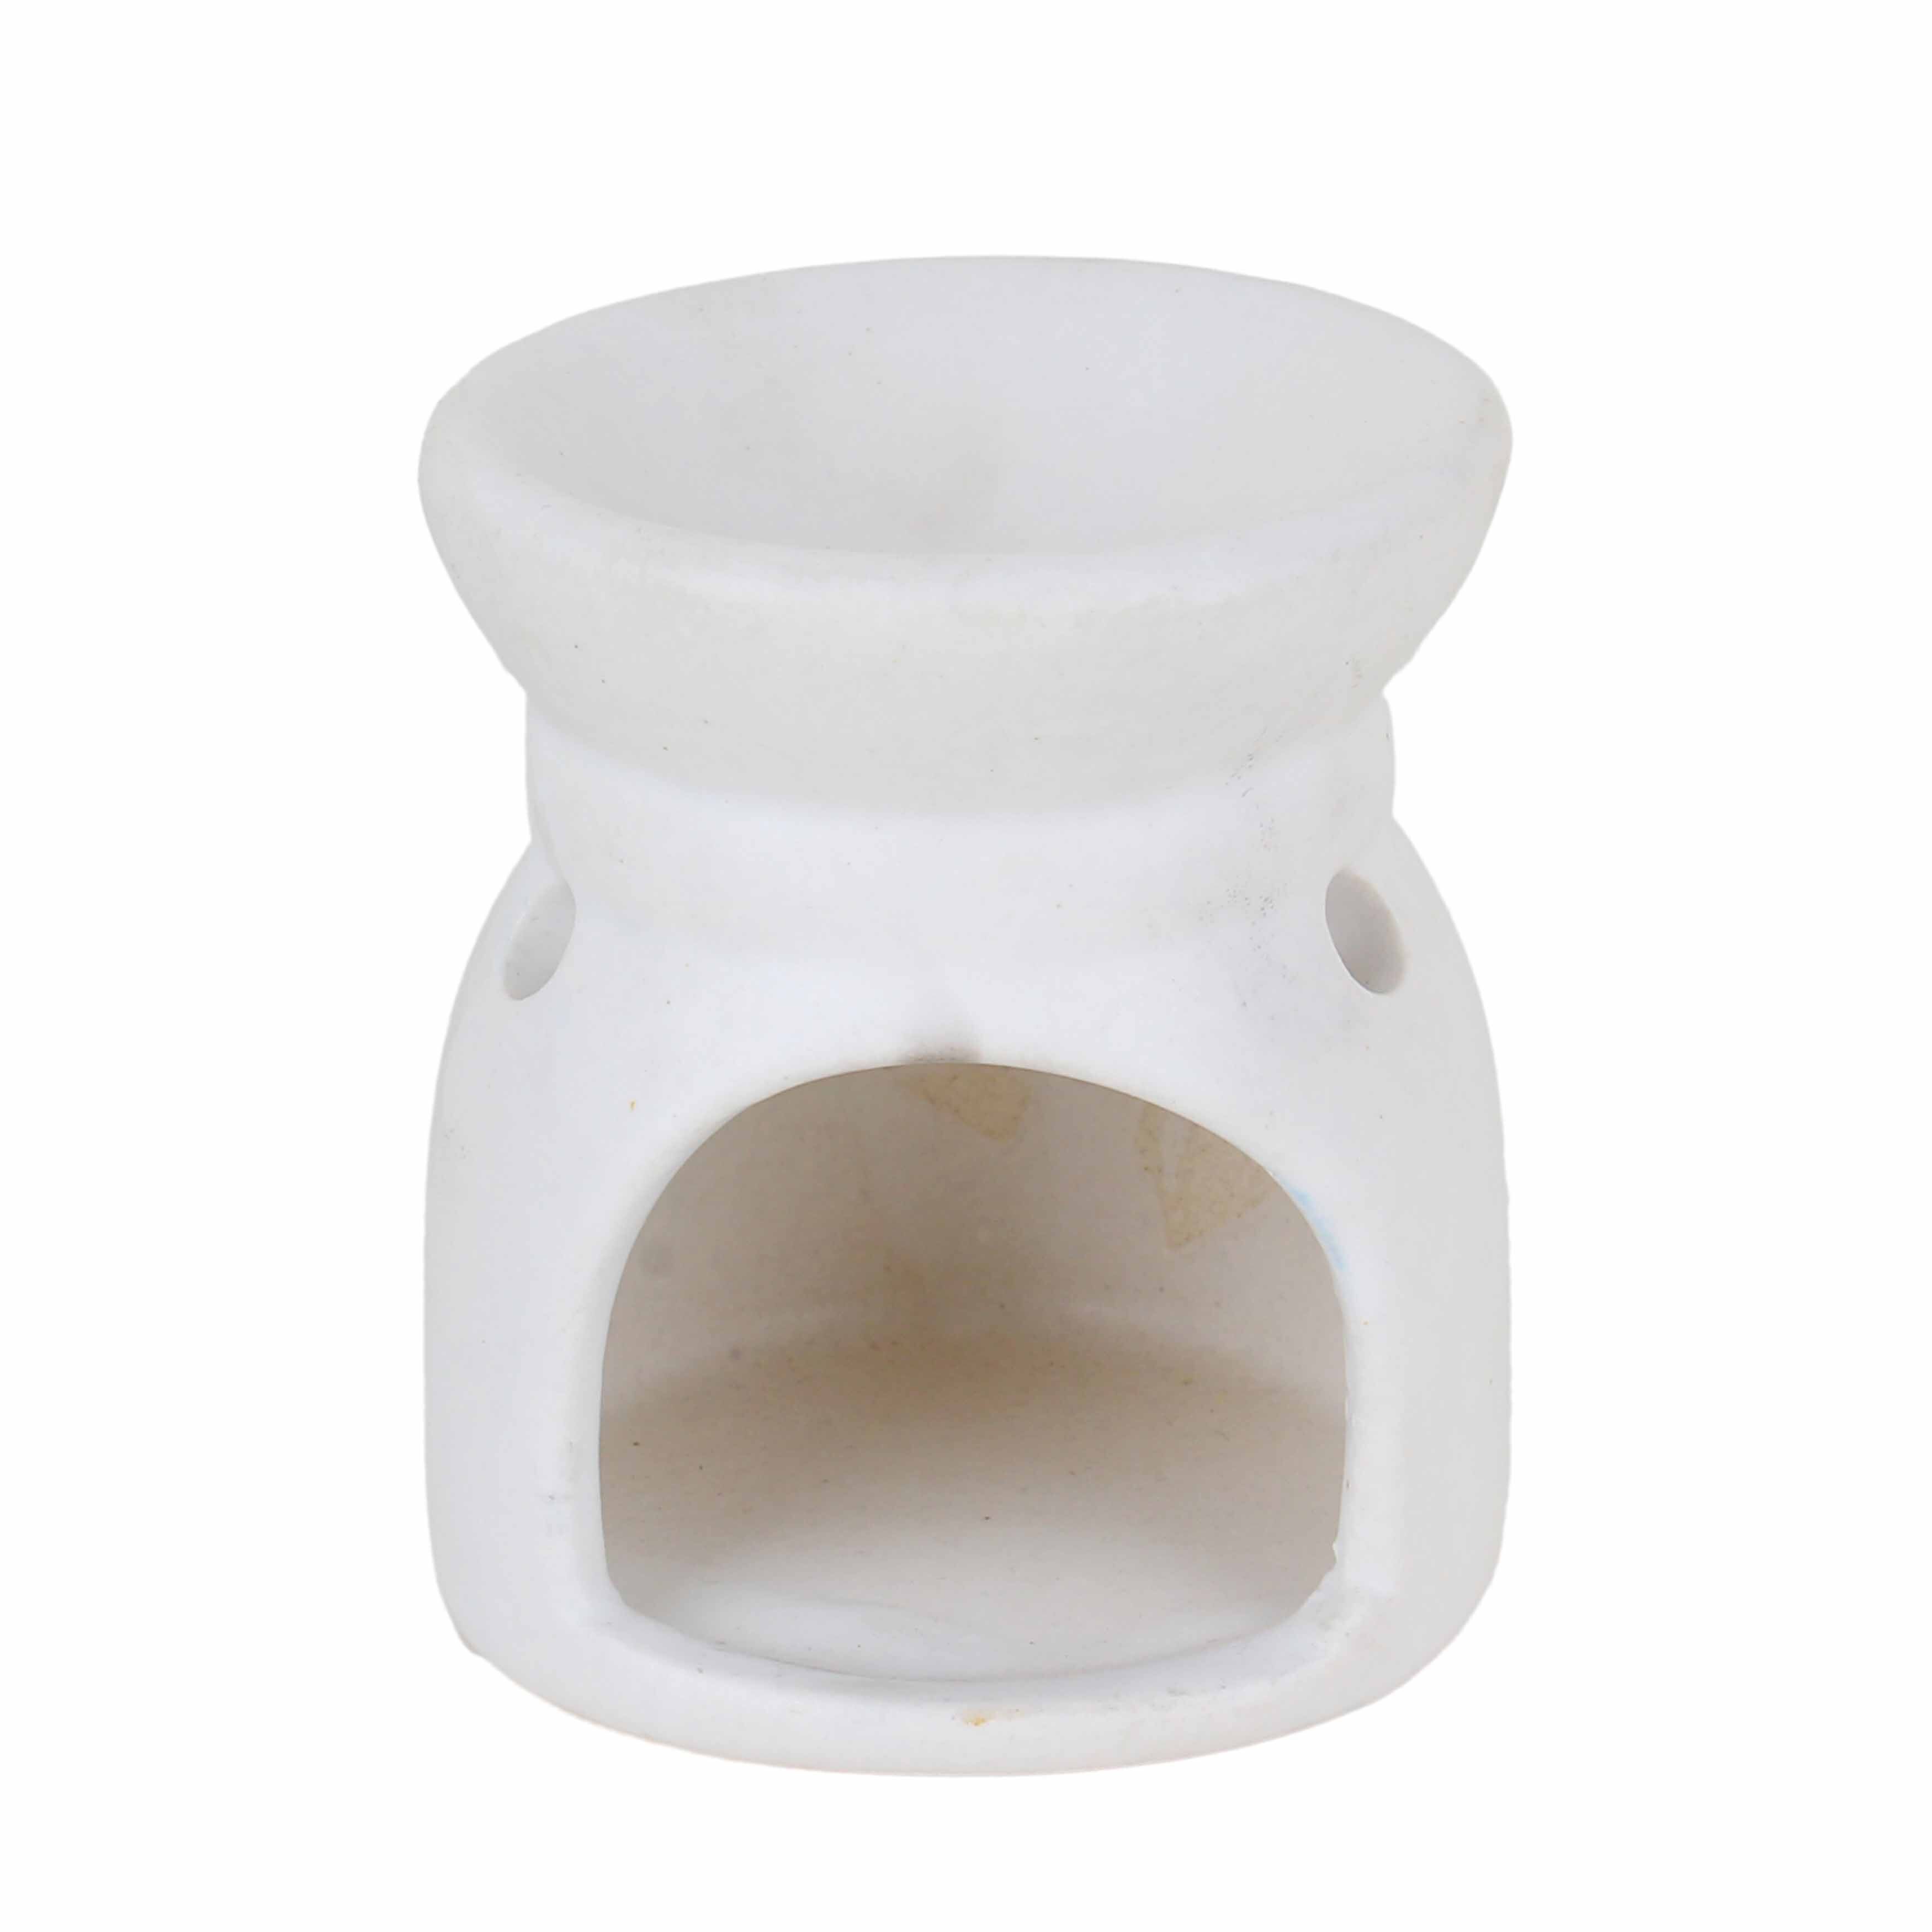 Asian Aura Ceramic Aromatic Oil Diffuser with 2 oil bottles AA-CB-0032W